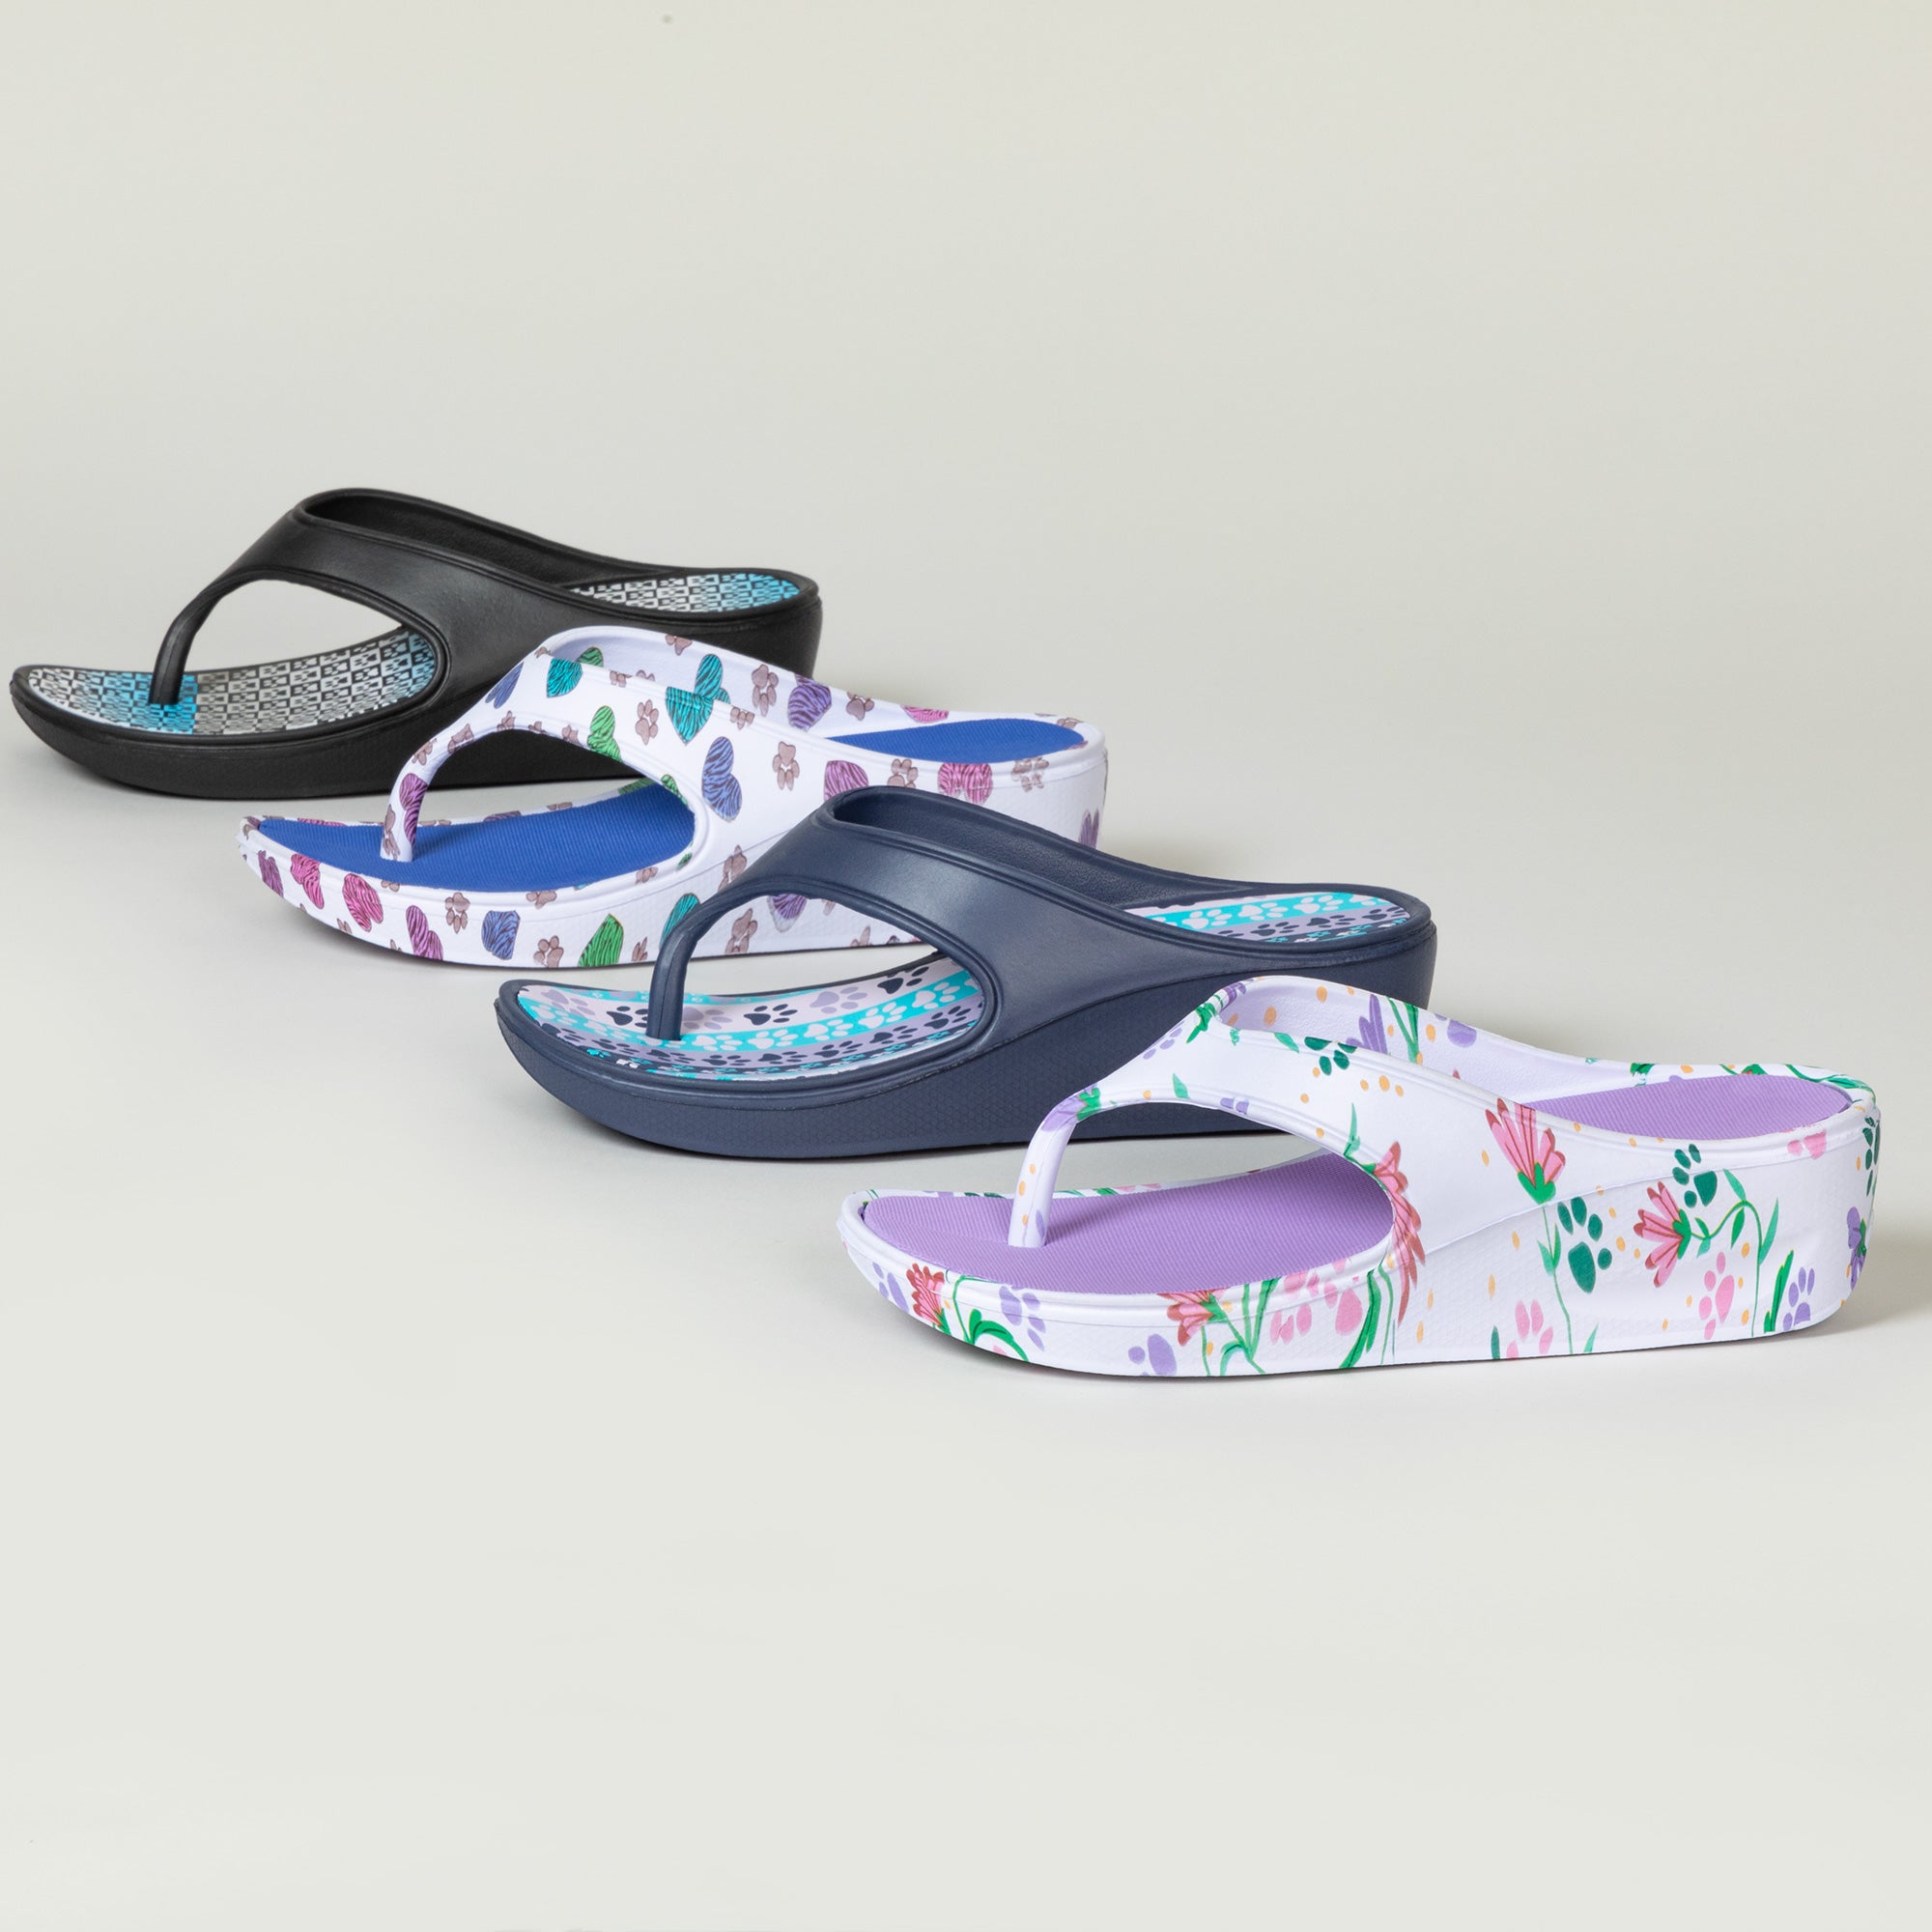 Paw Print Wedge Flip Flops - Paws In The Garden - 7